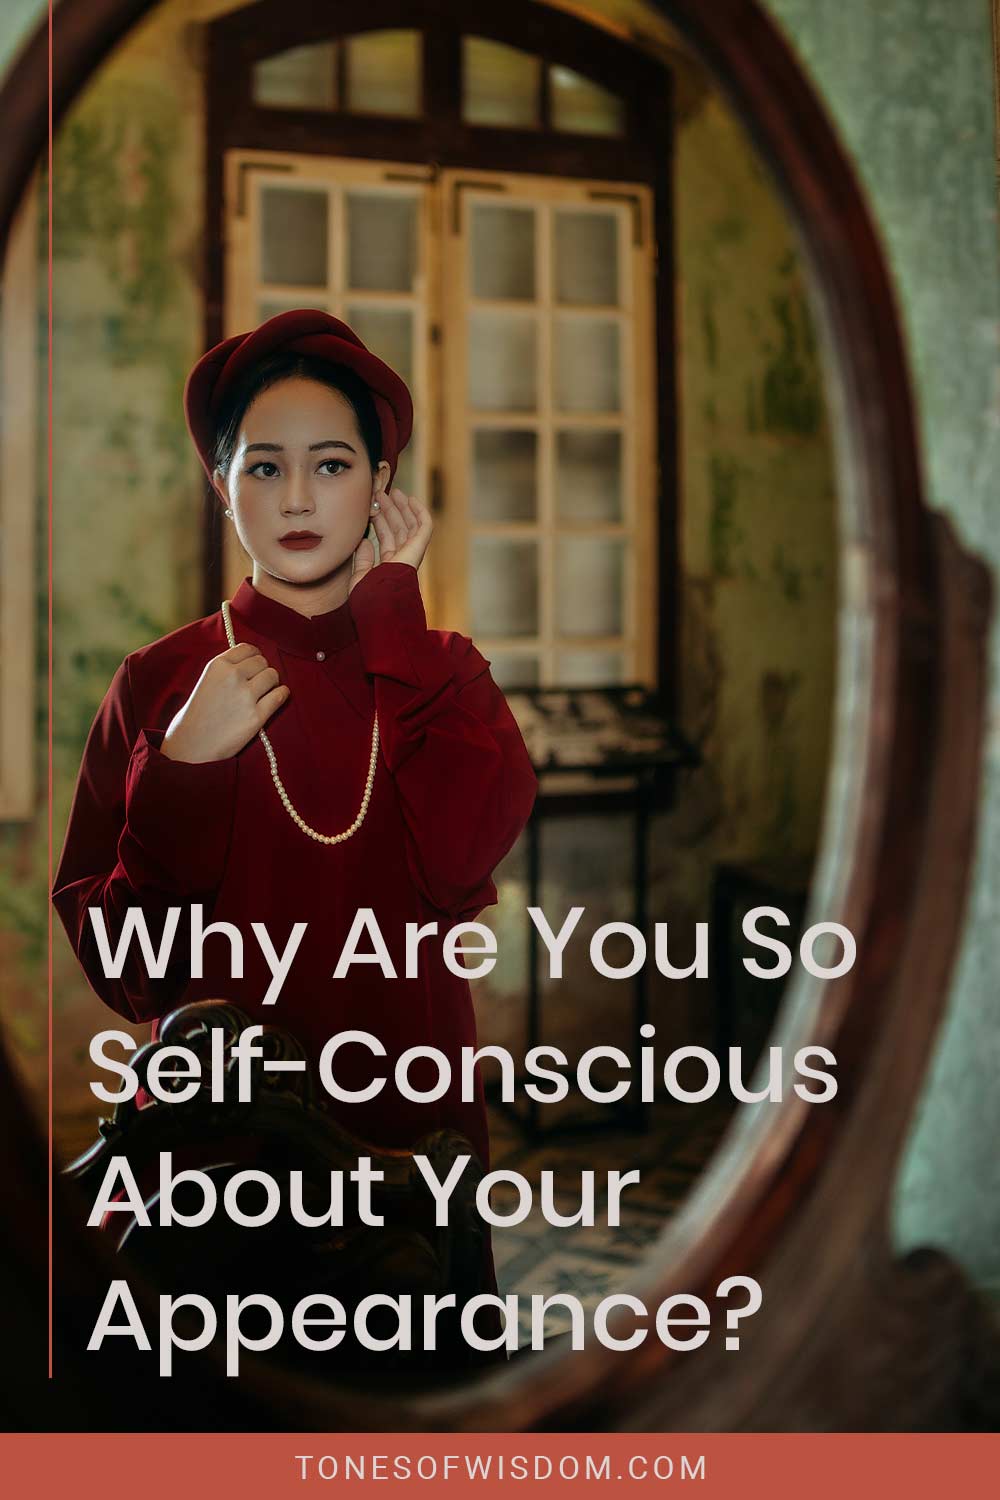 Why Are You So Self-Conscious About Your Appearance?